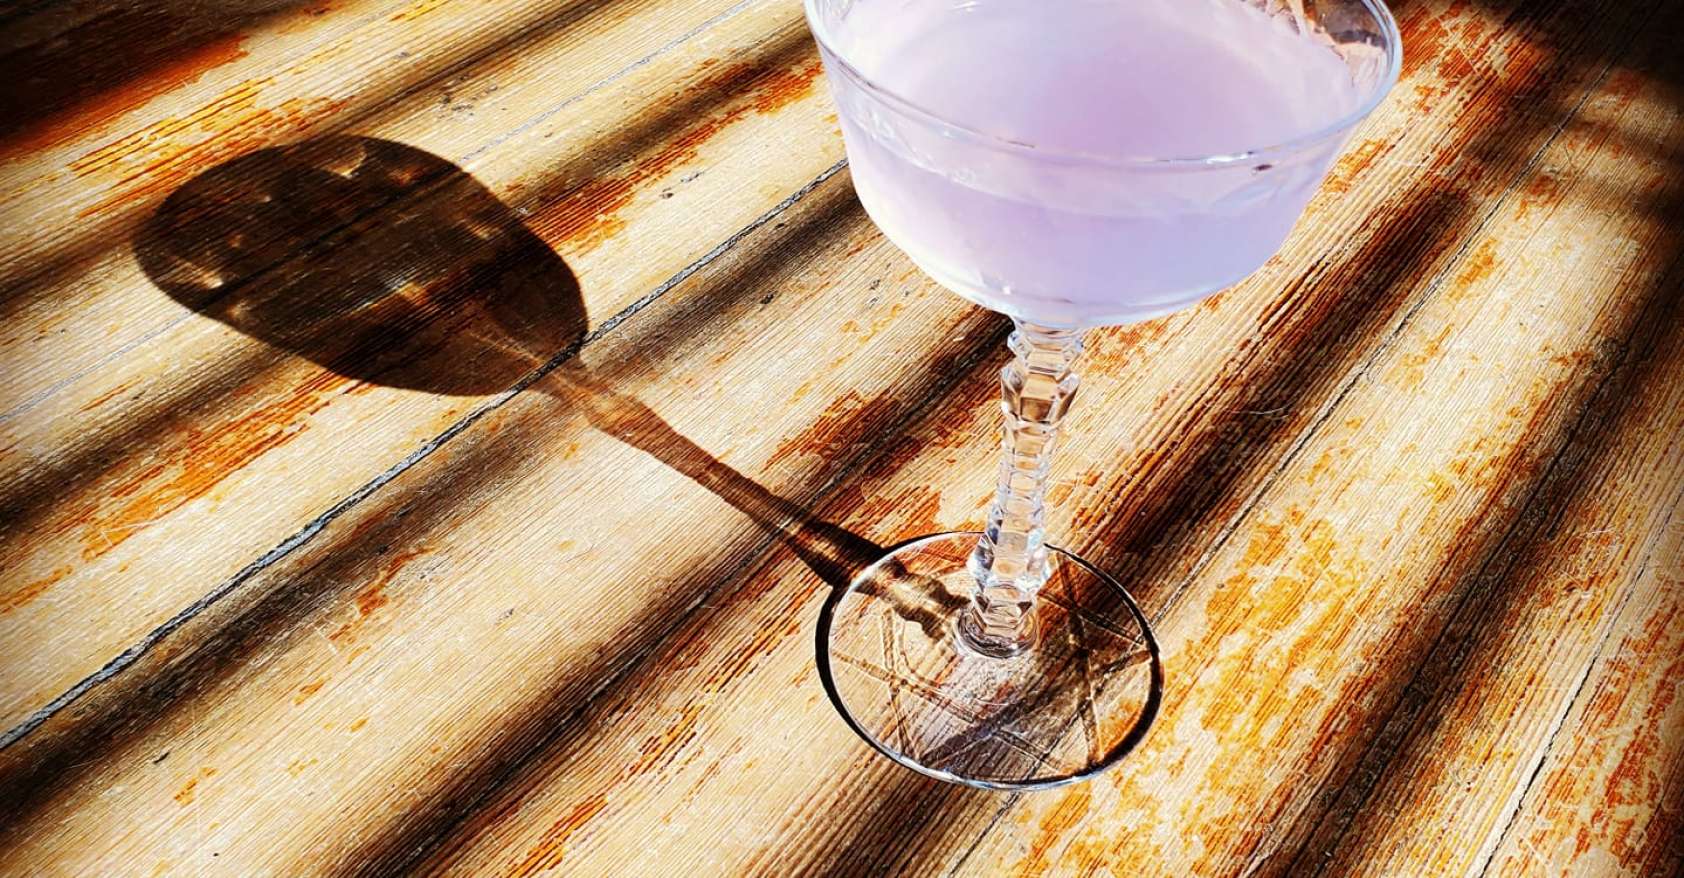 A single cocktail on a wooden deck its shadow to the left made by bartender Tiffanie Barriere who provides history lessons with every cocktail she serves